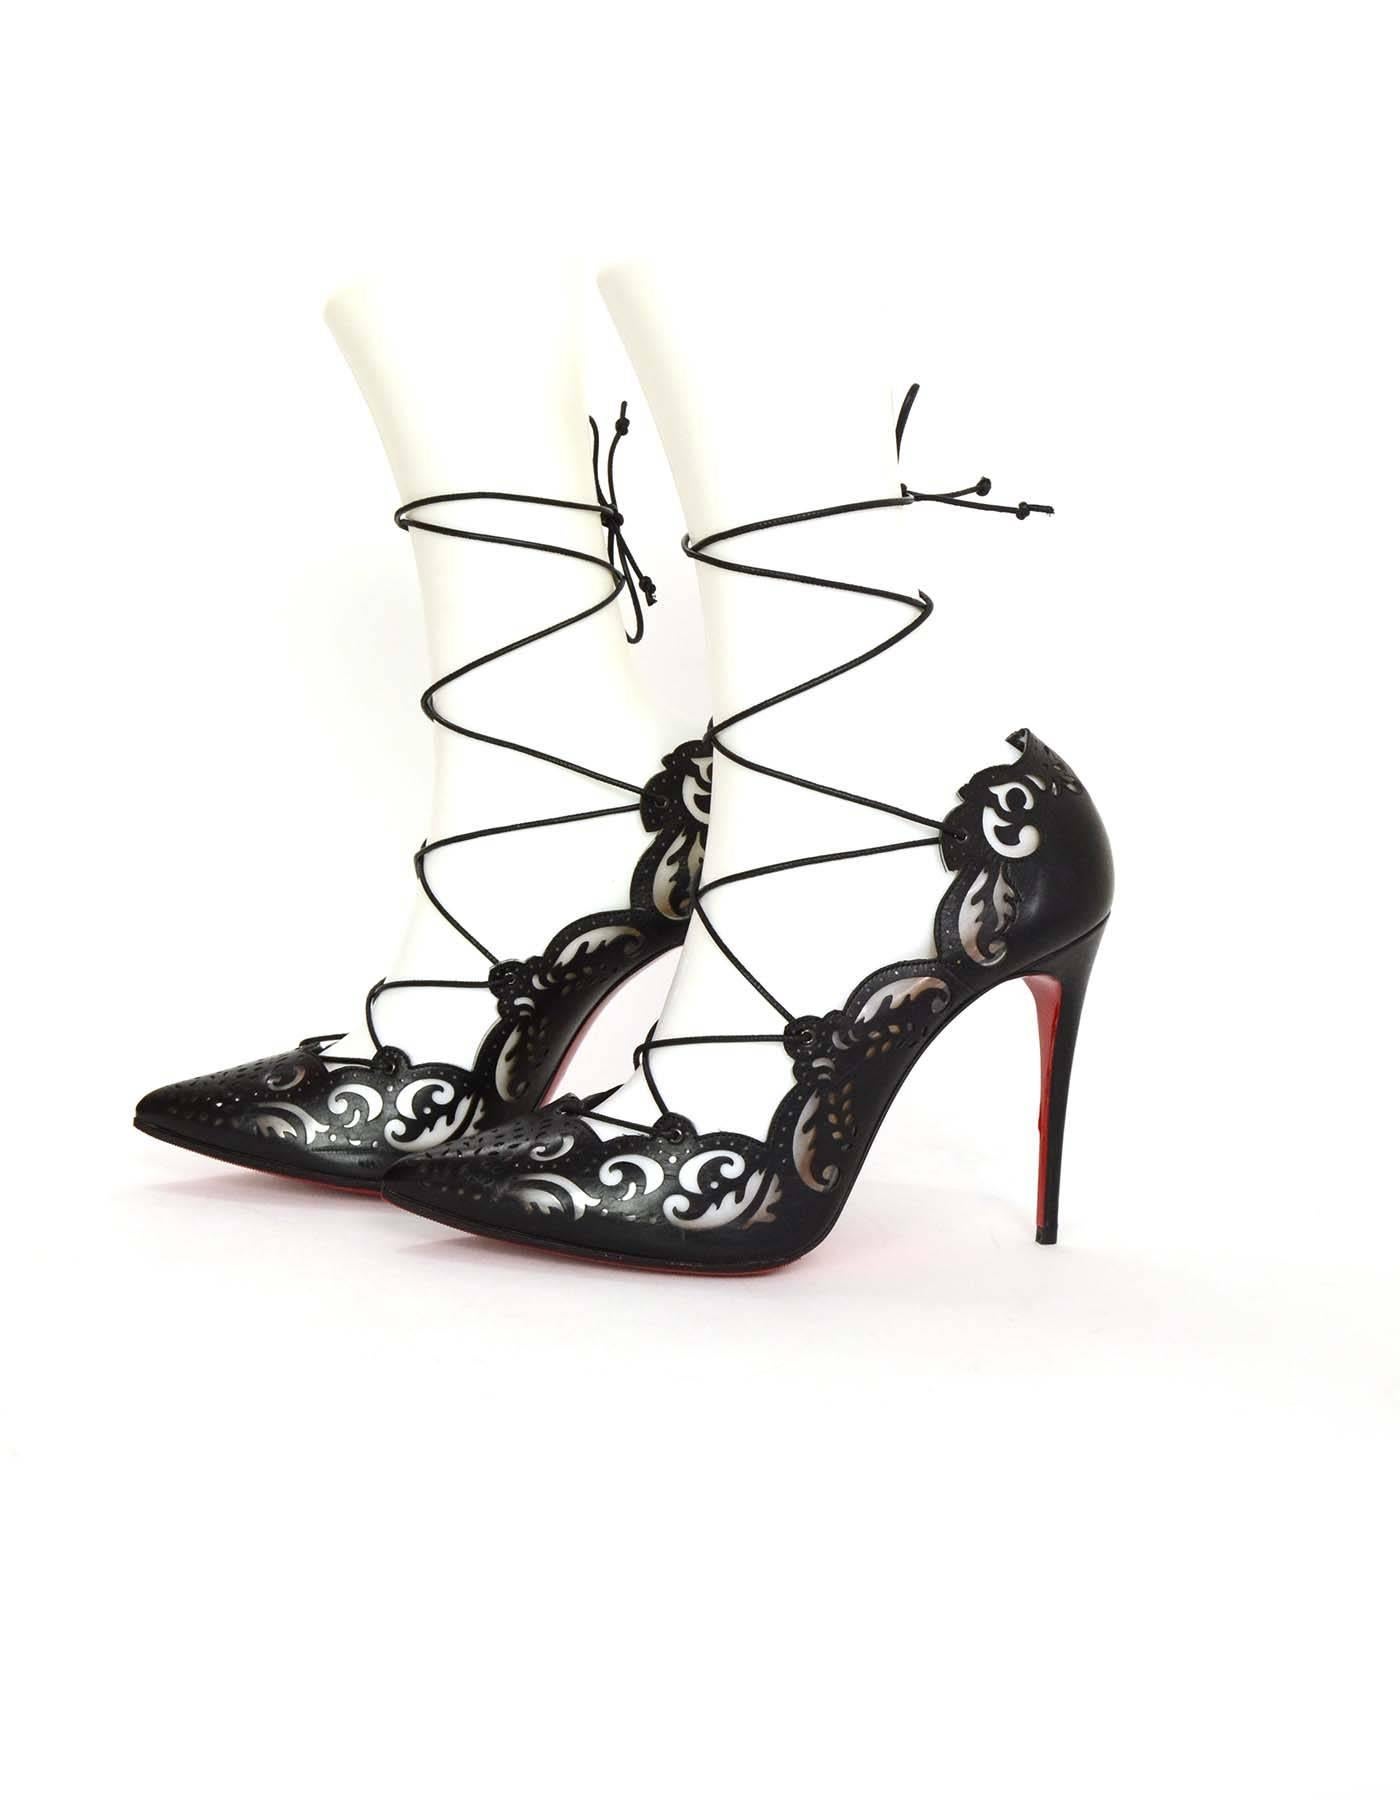 Christian Louboutin Laser Cut Impera 100mm Lace Up Pumps

Made In: Italy
Color: Black
Materials: Leather
Closure/Opening: Lace up tie
Sole Stamp: Christian Louboutin Made In Italy 39 1/2
Retail Price: $1,295 + tax
Overall Condition: